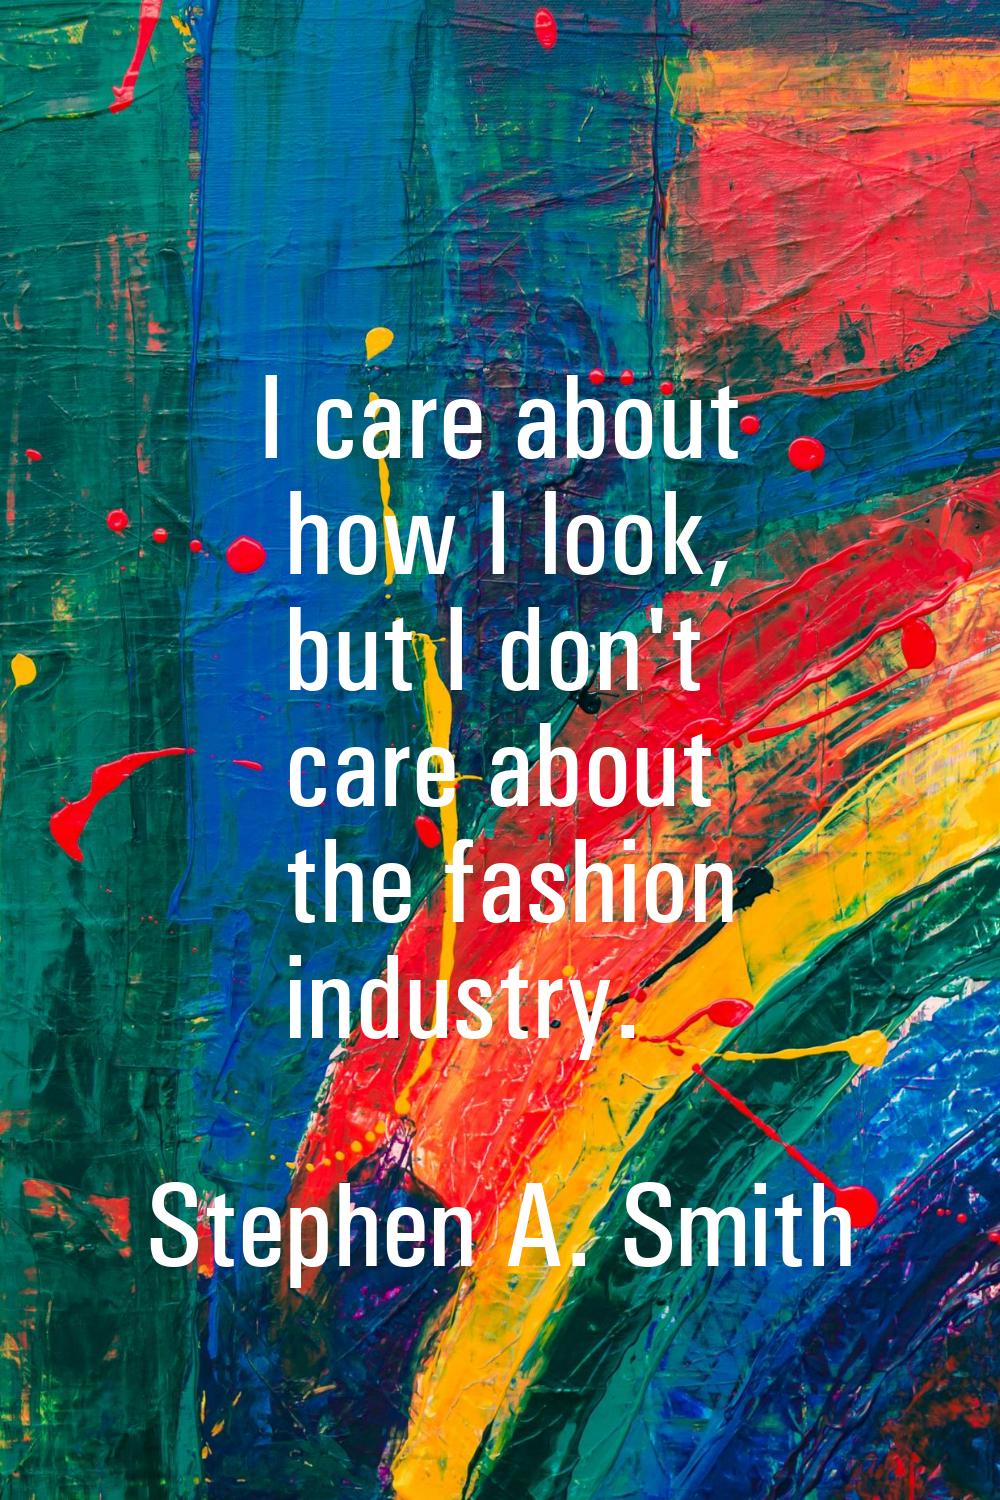 I care about how I look, but I don't care about the fashion industry.